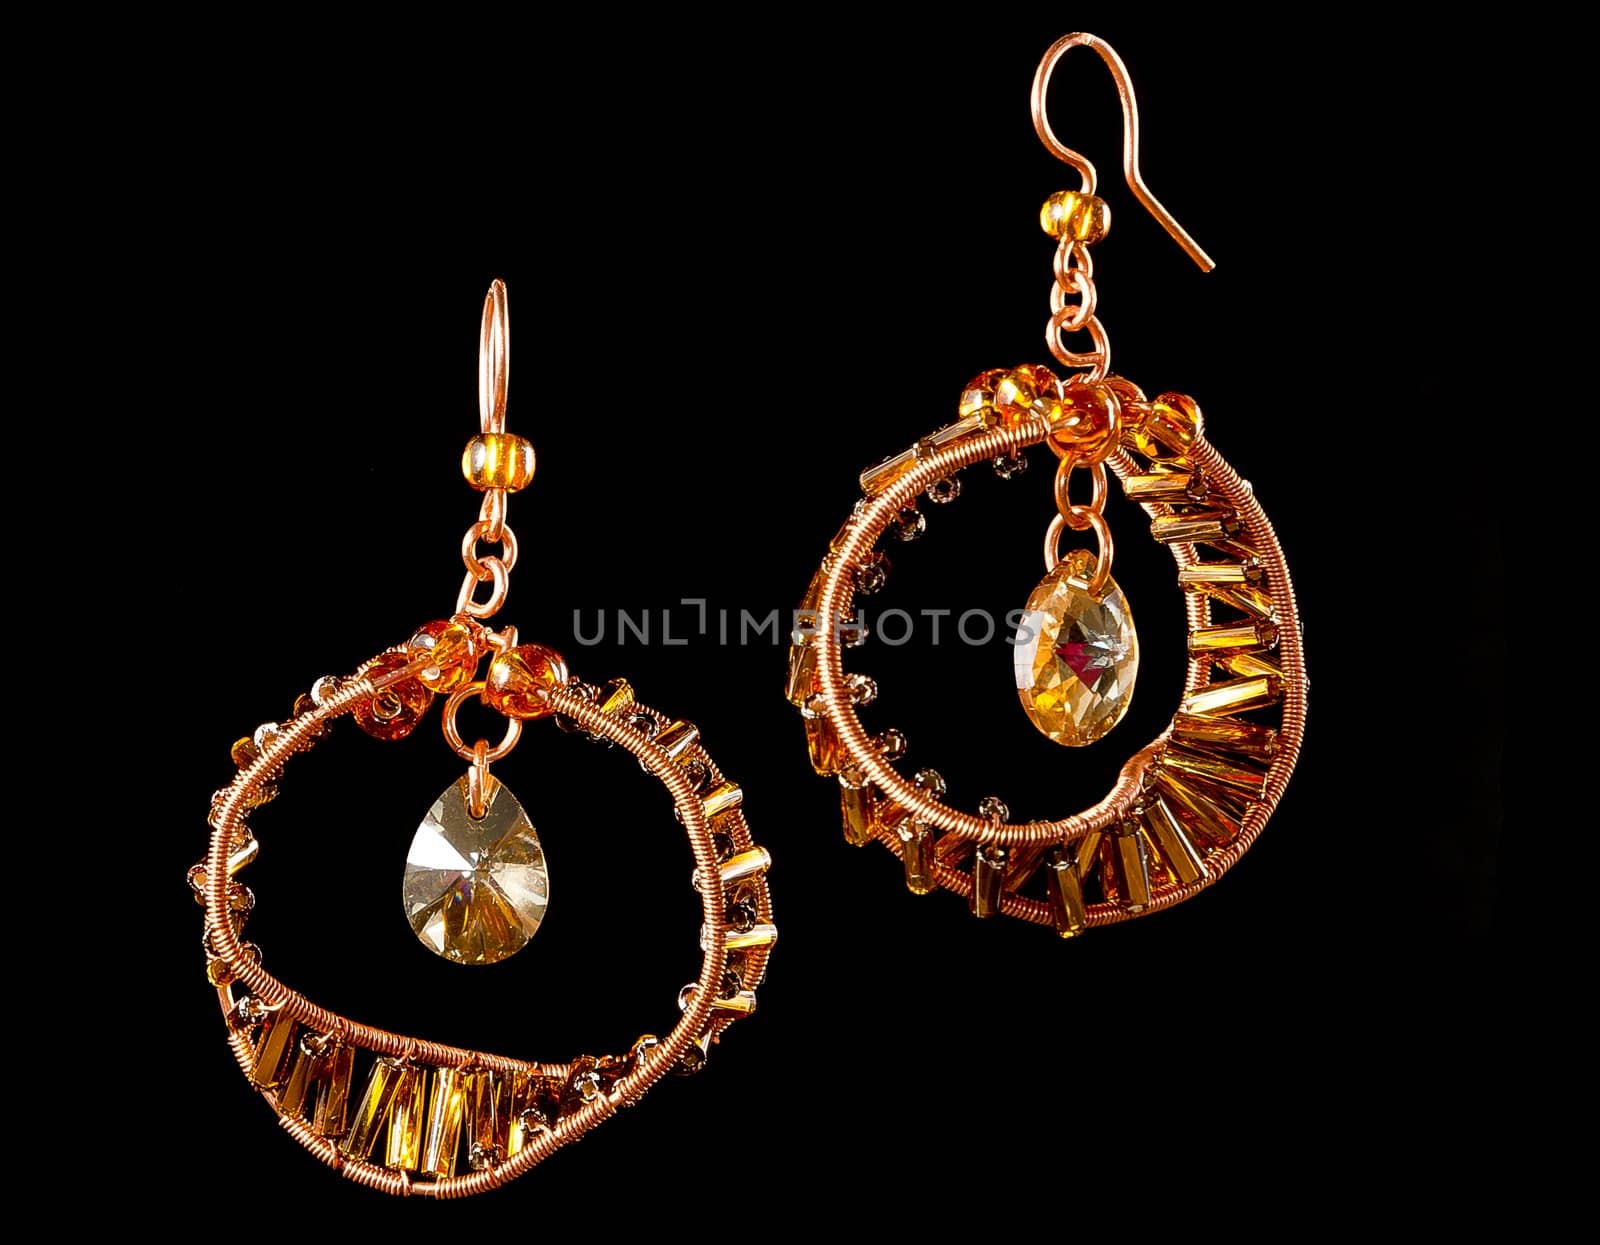 Unique handmade wire-work earrings with yellow drops and spangles